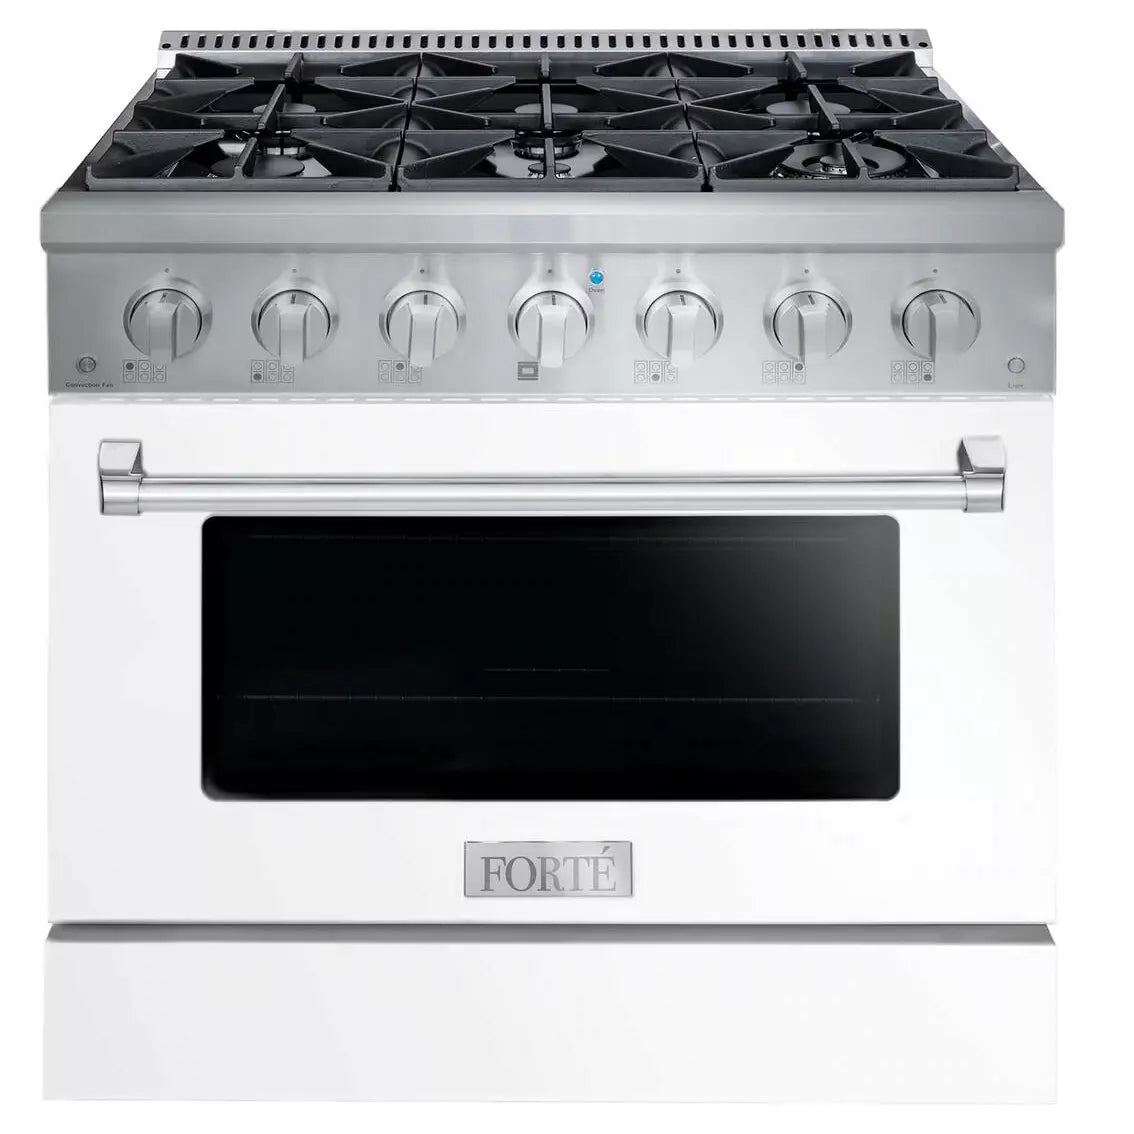 Forte 36" Freestanding All Gas Range - 6 Sealed Italian Made Burners, 4.5 cu. ft. Oven, Easy Glide Oven Racks - in Stainless Steel With White Door And Stainless Steel Knob (FGR366BWW)